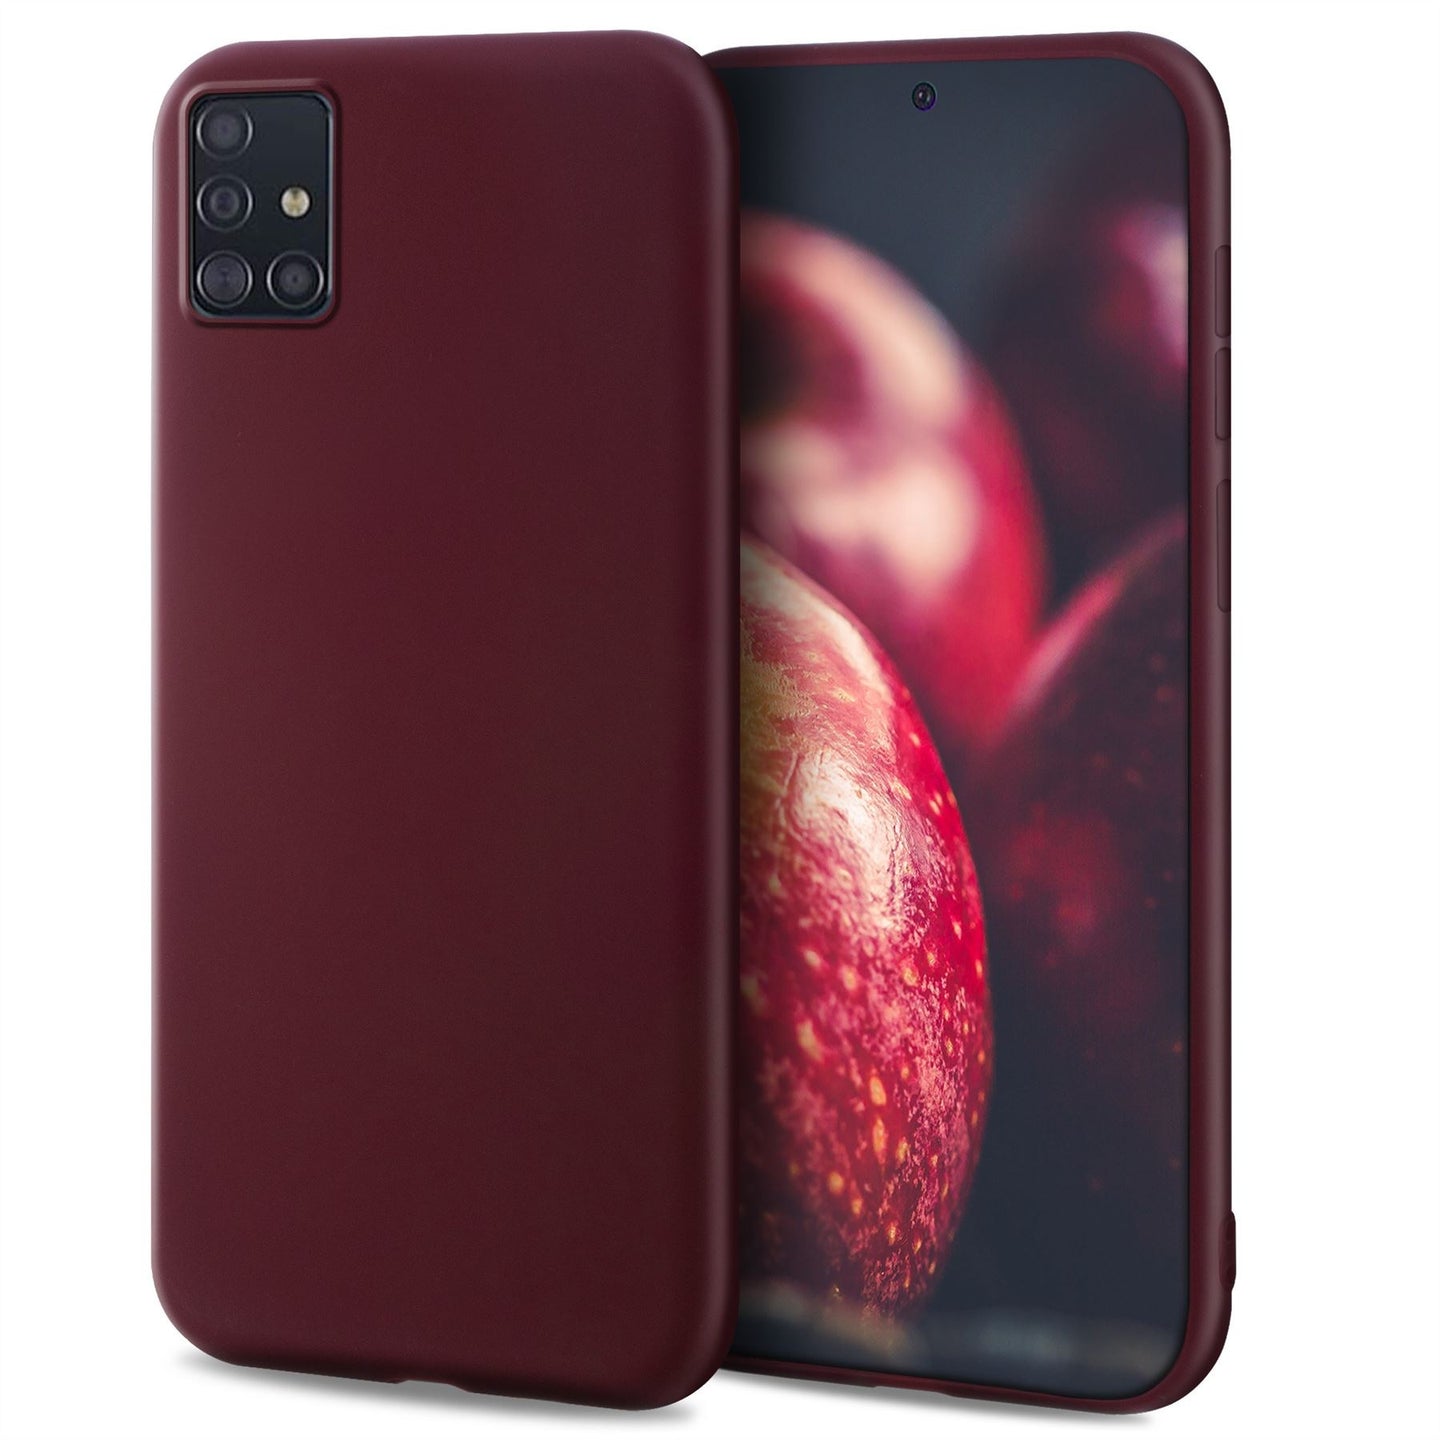 Moozy Minimalist Series Silicone Case for Samsung A51, Wine Red - Matte Finish Slim Soft TPU Cover